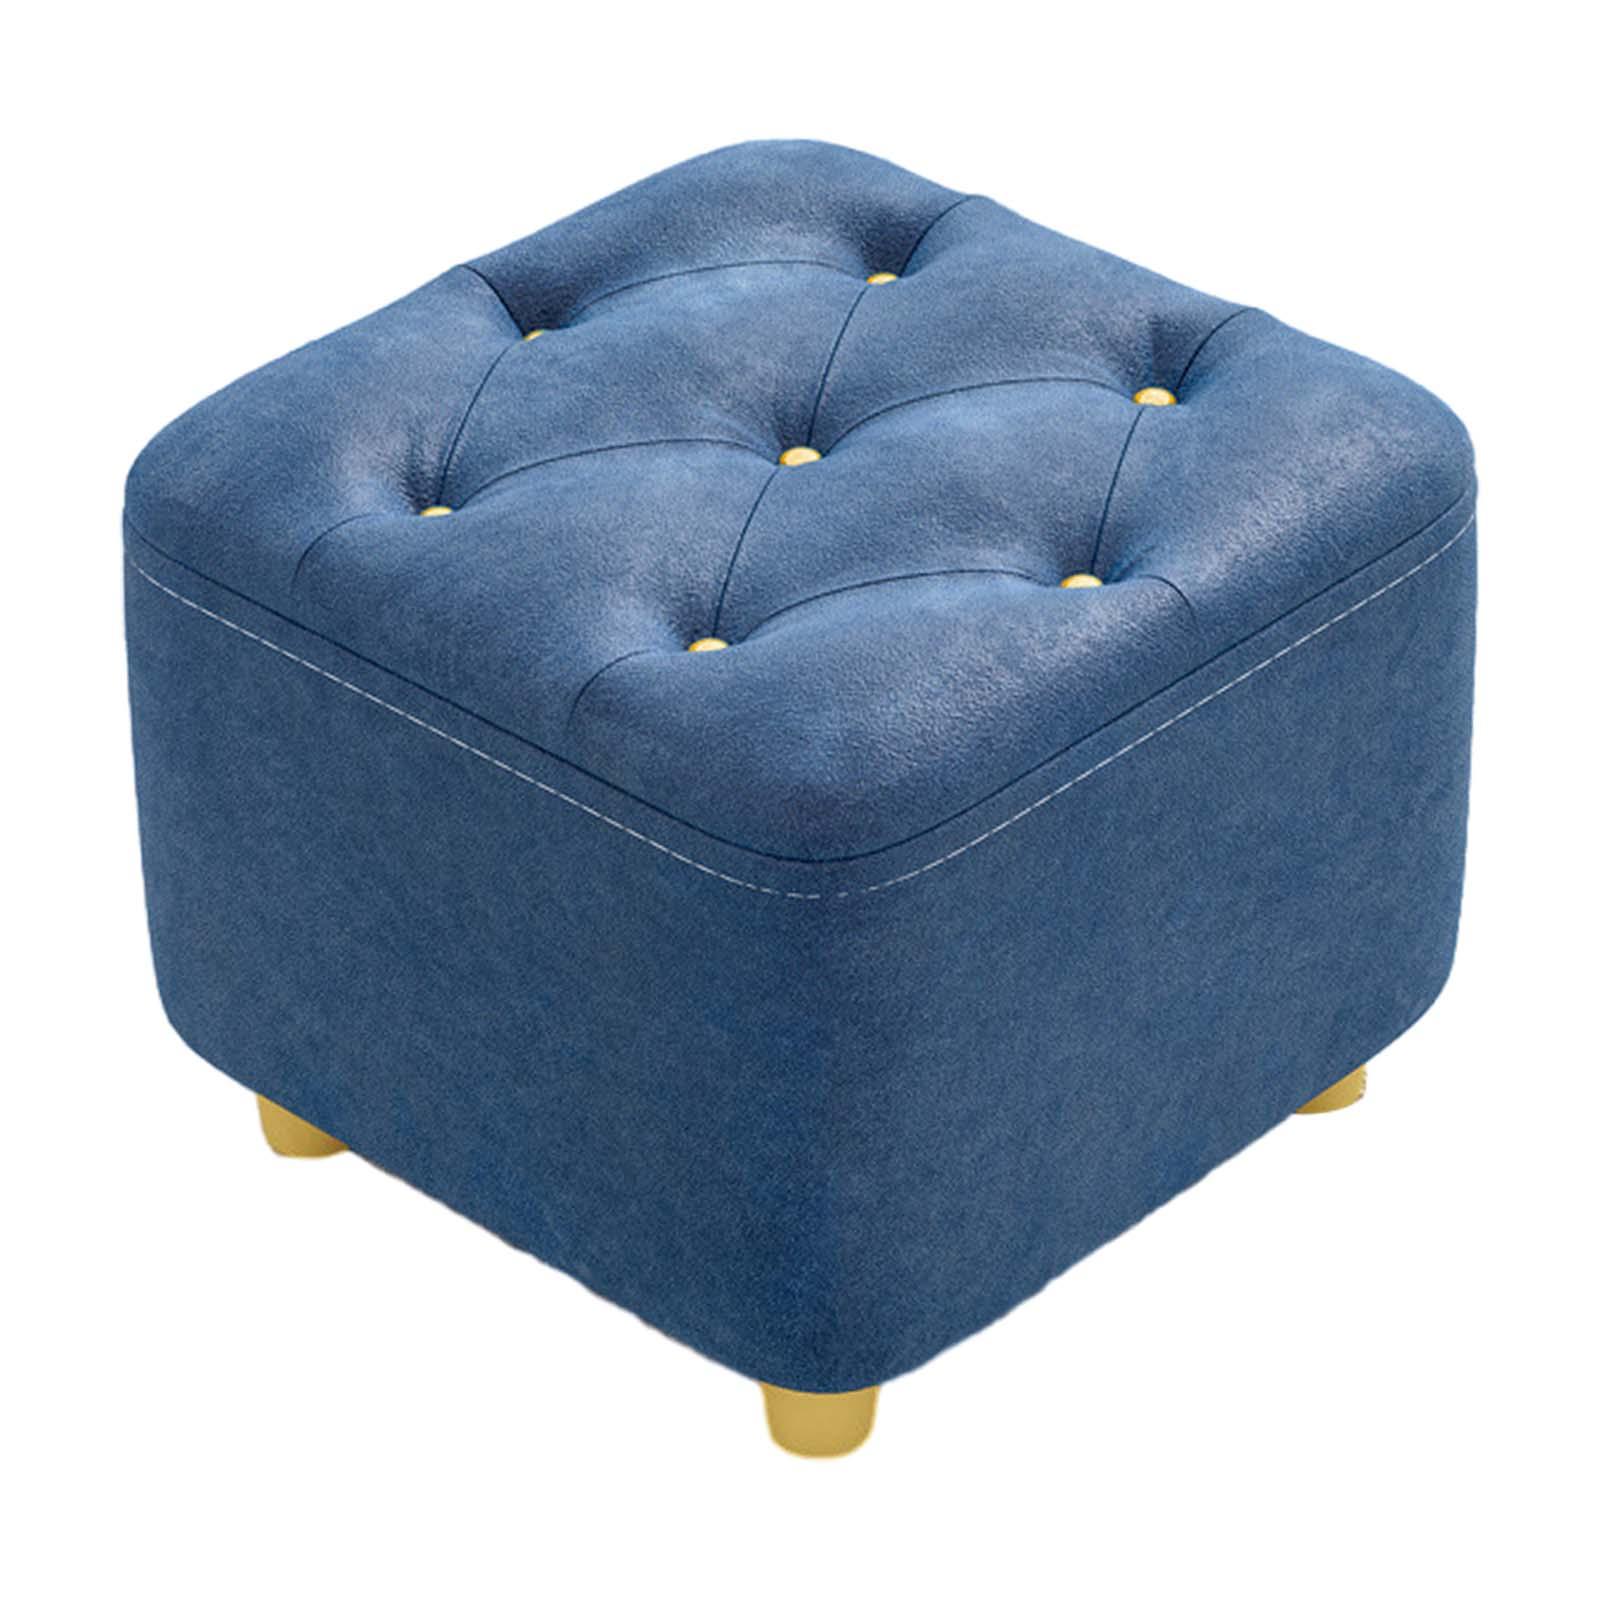 Square Footstool Foot Stool Comfortable Stepstool Creative Ottoman Stool Footrest for Living Room Dressing Room Bedroom Couch dark blue - image 5 of 8